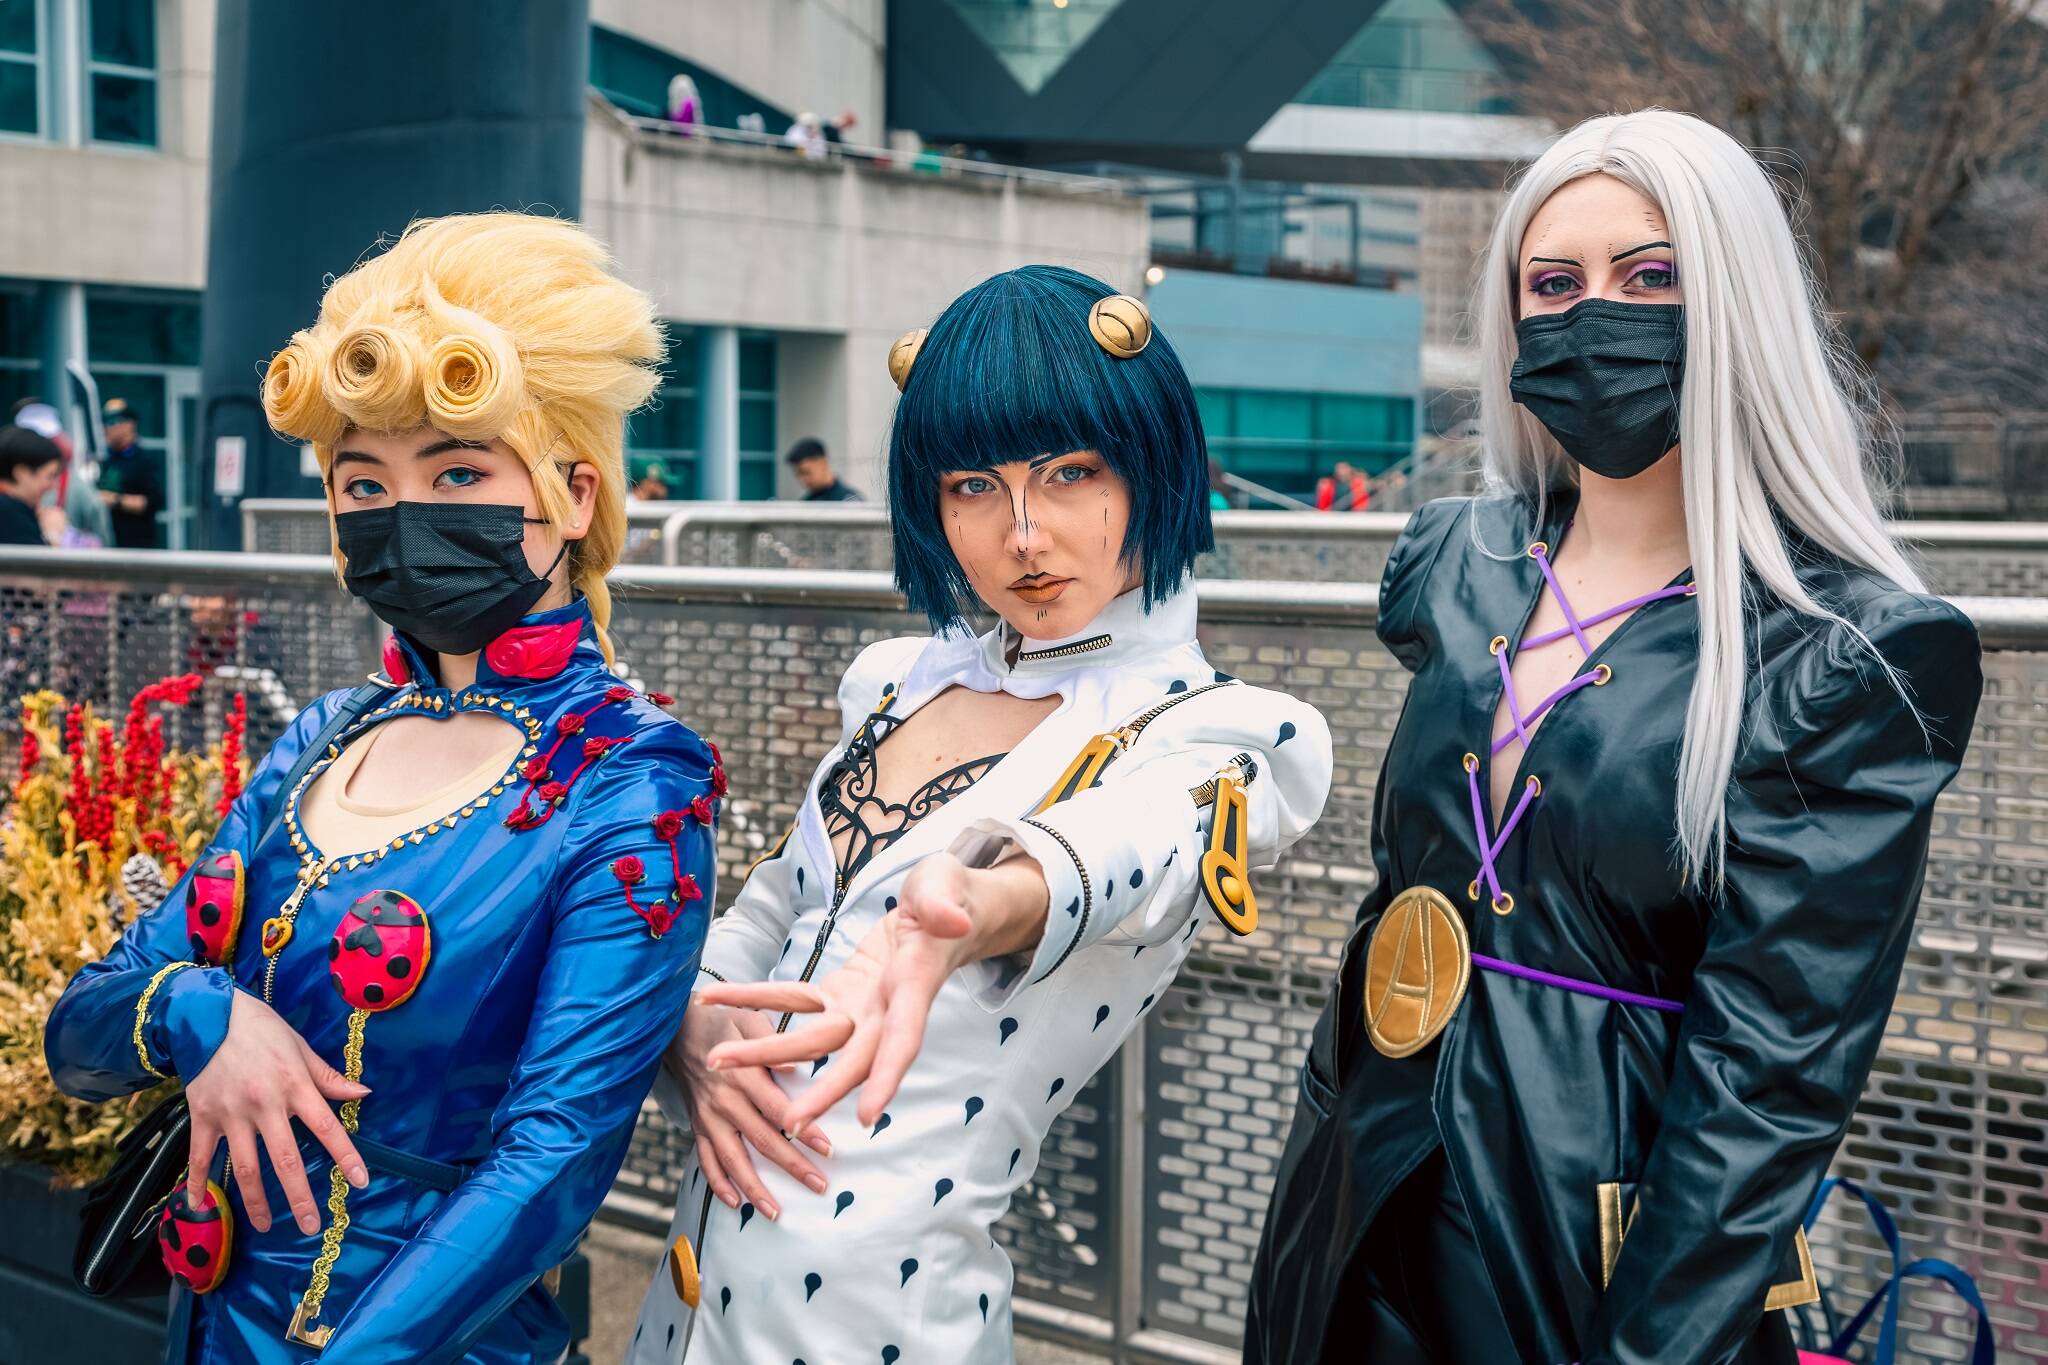 Here are some of the best costumes from Toronto Comicon 2022